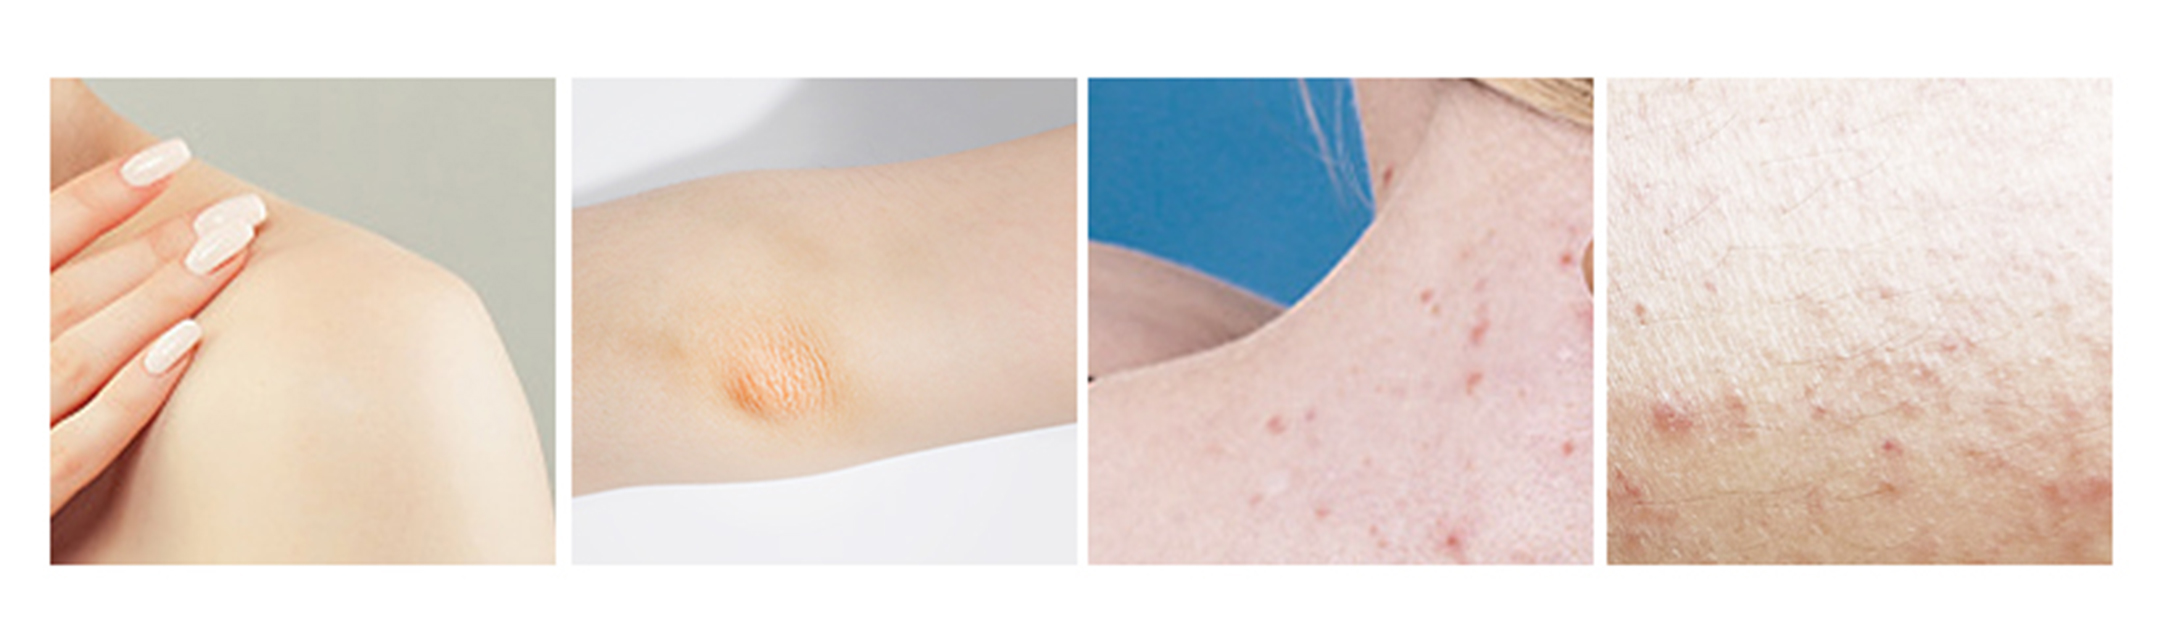 skin conditions image 